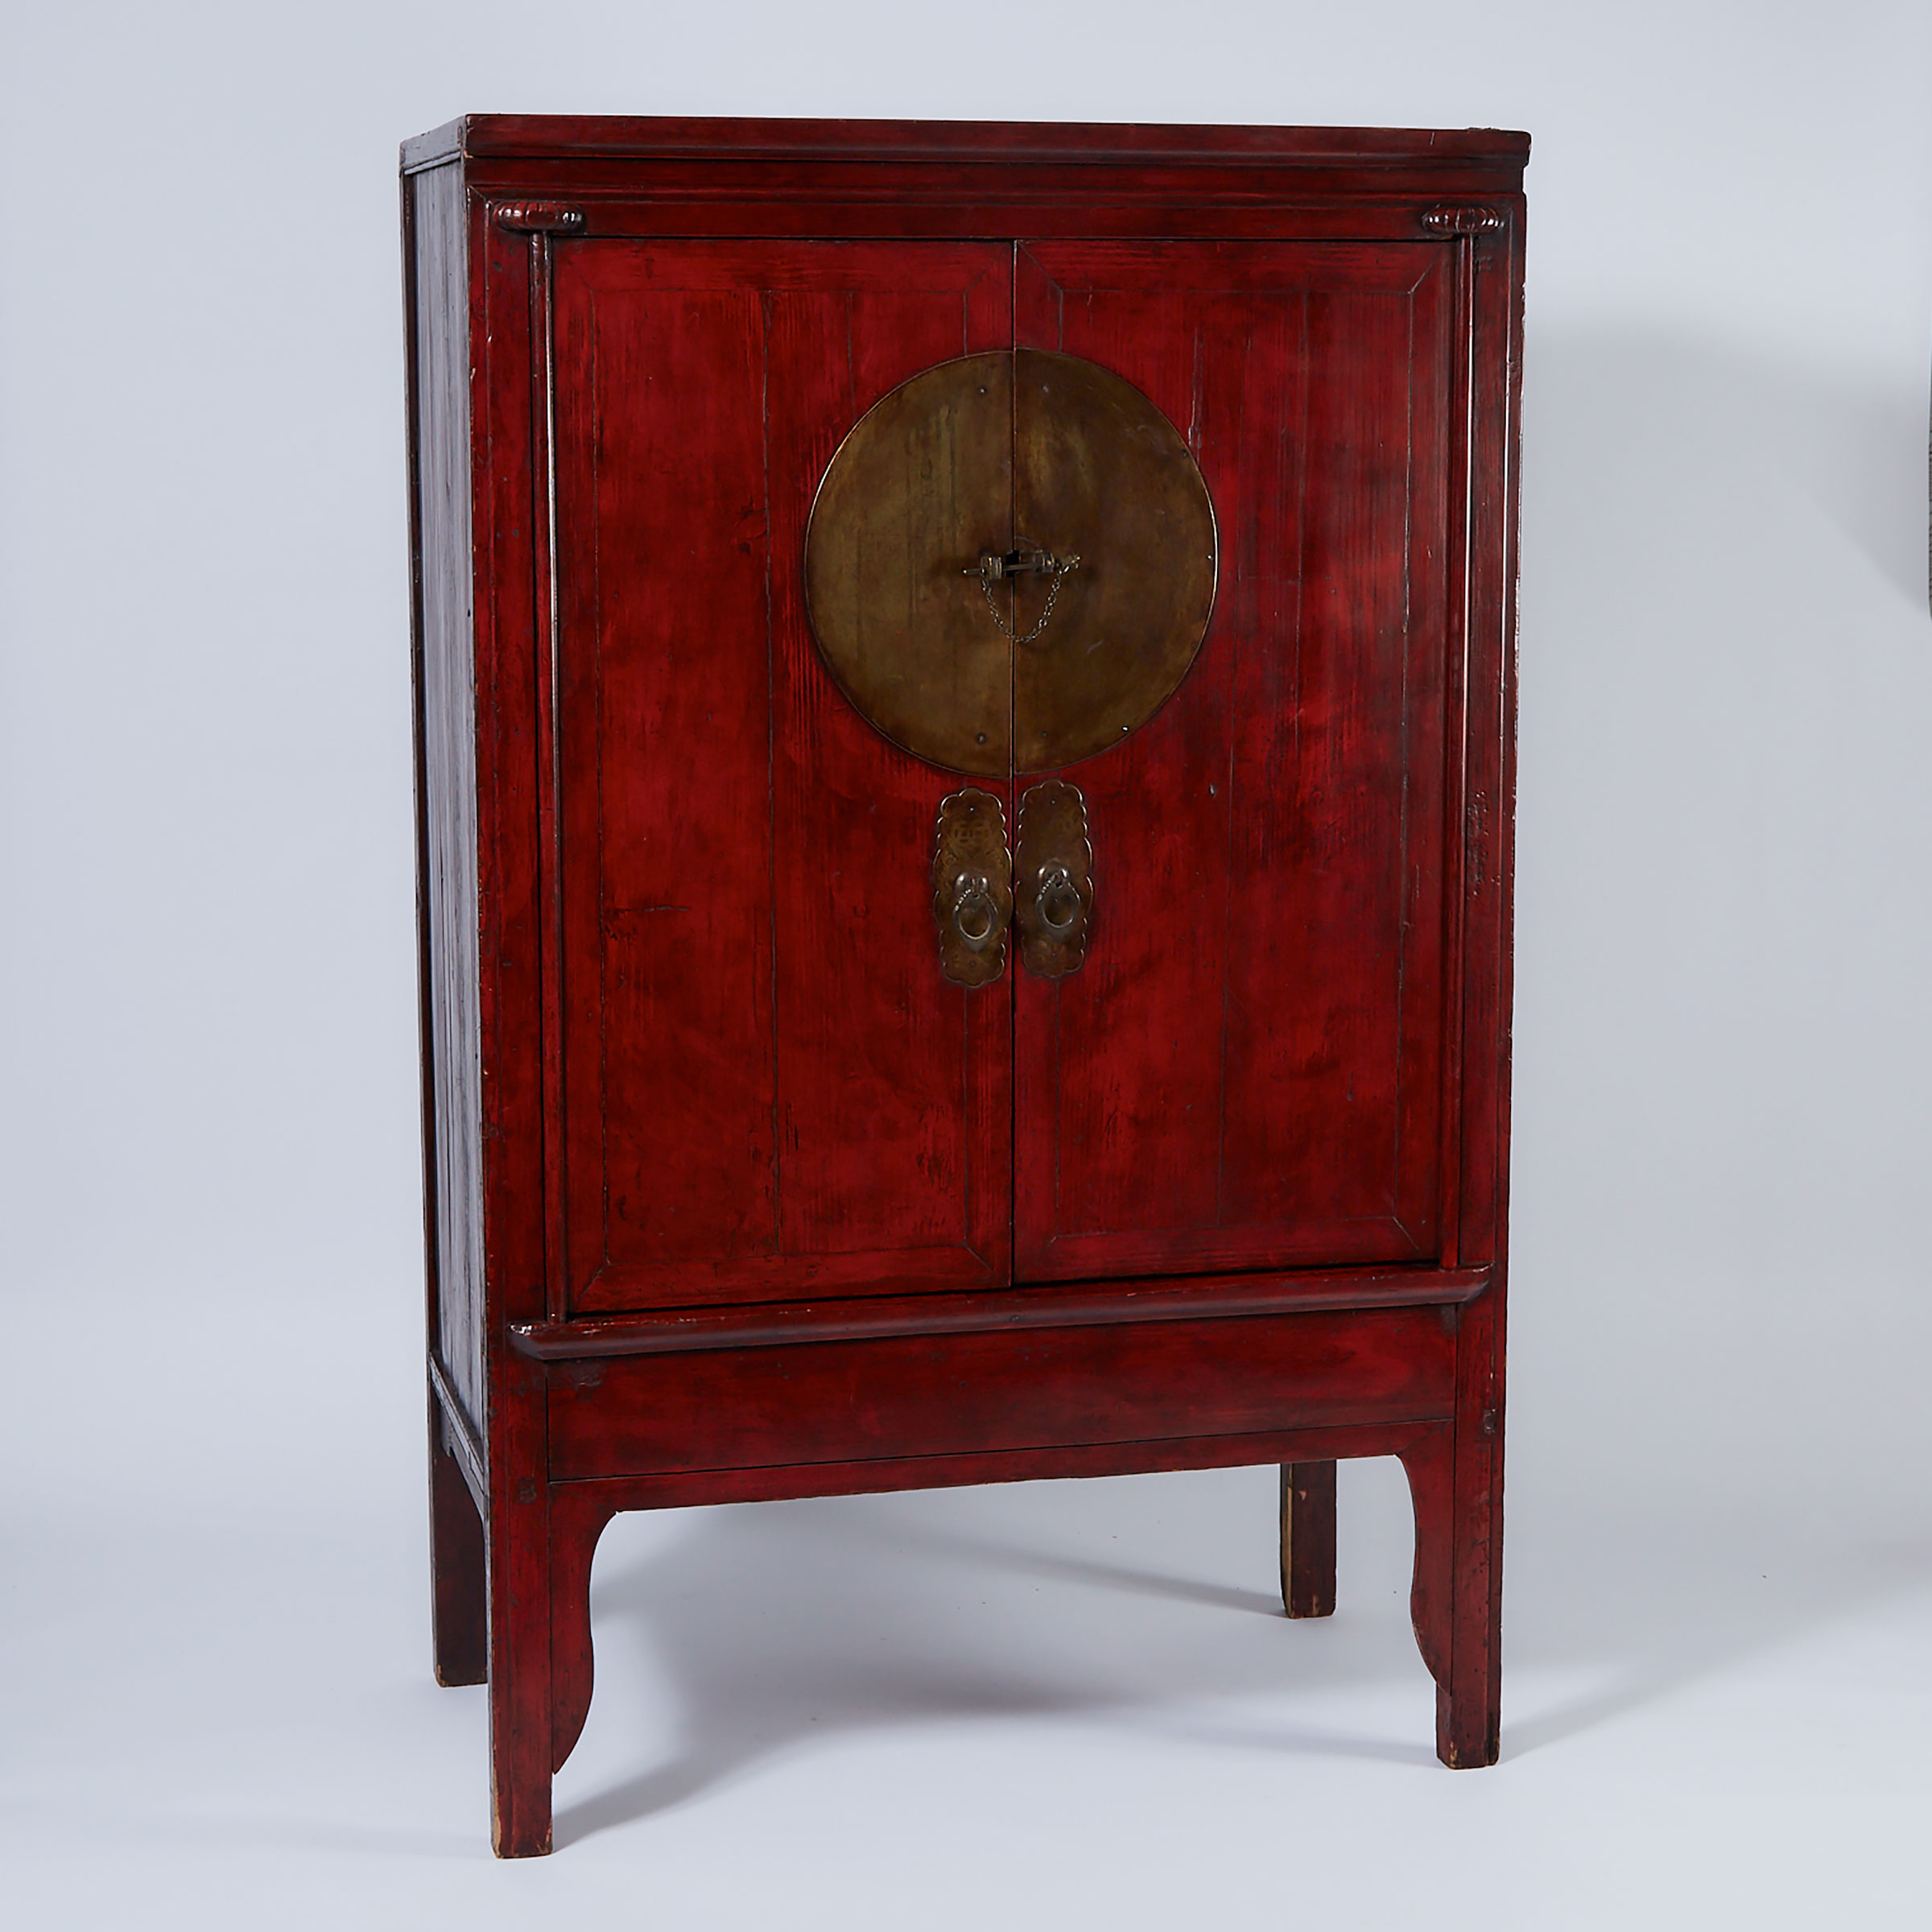 Chinese Cabinet on Stand, 19th century